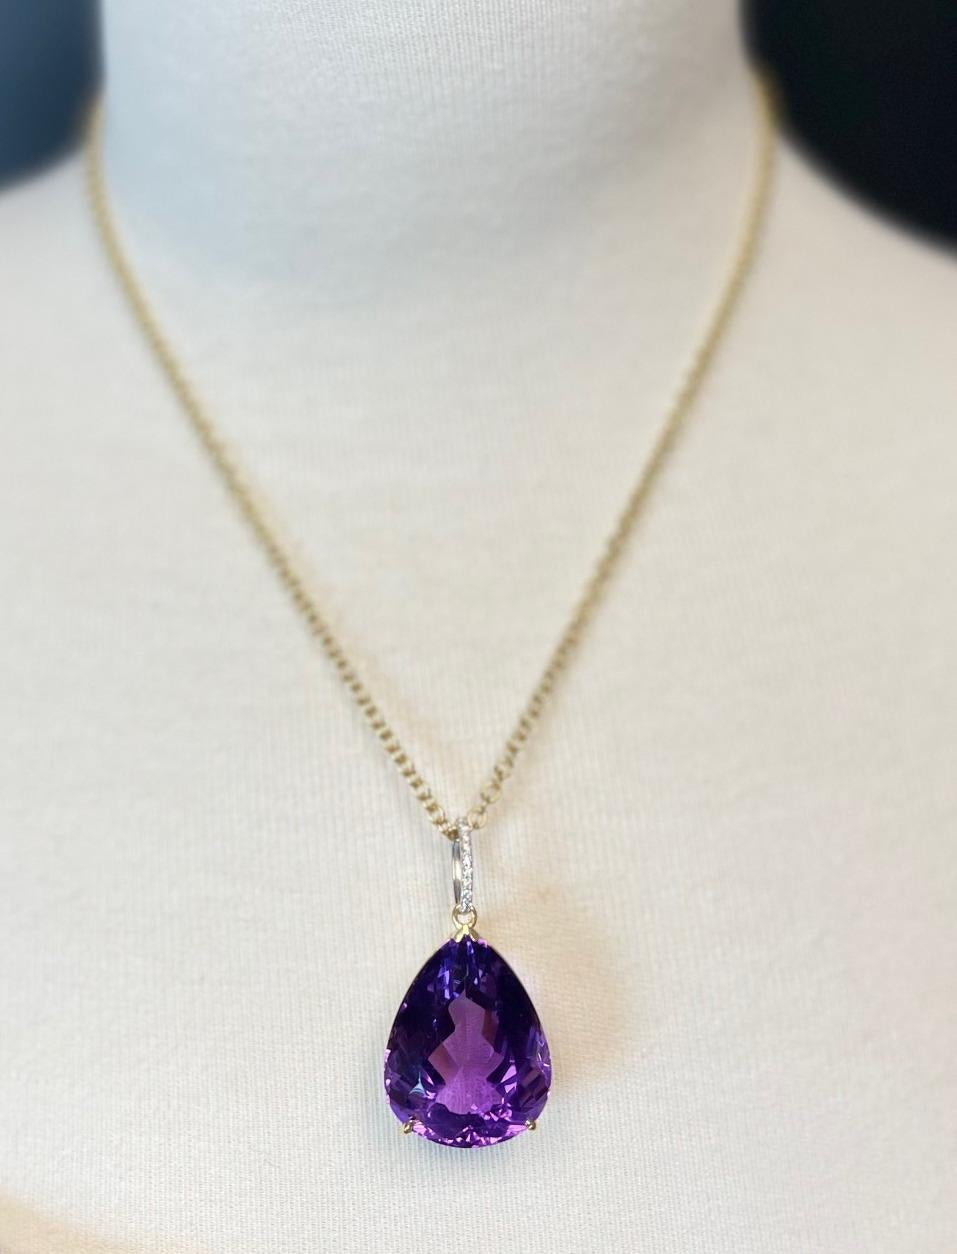 40 Carat Pear Shape Amethyst and Diamond Pendant in 18k Yellow Gold with Chain For Sale 6